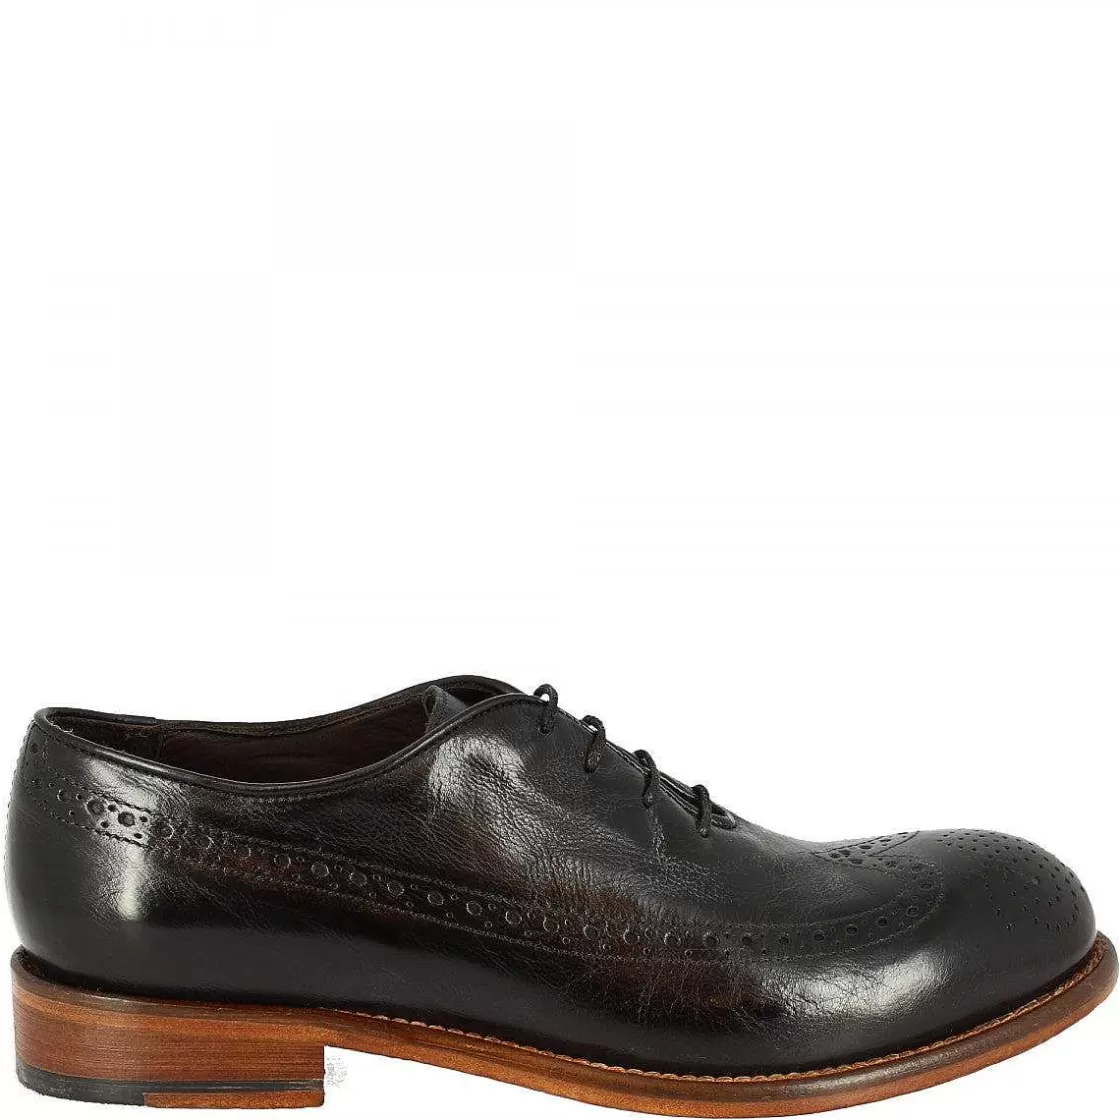 Leonardo Men'S Handmade Formal Brogues Lace-Up Shoes In Black Calf Leather Best